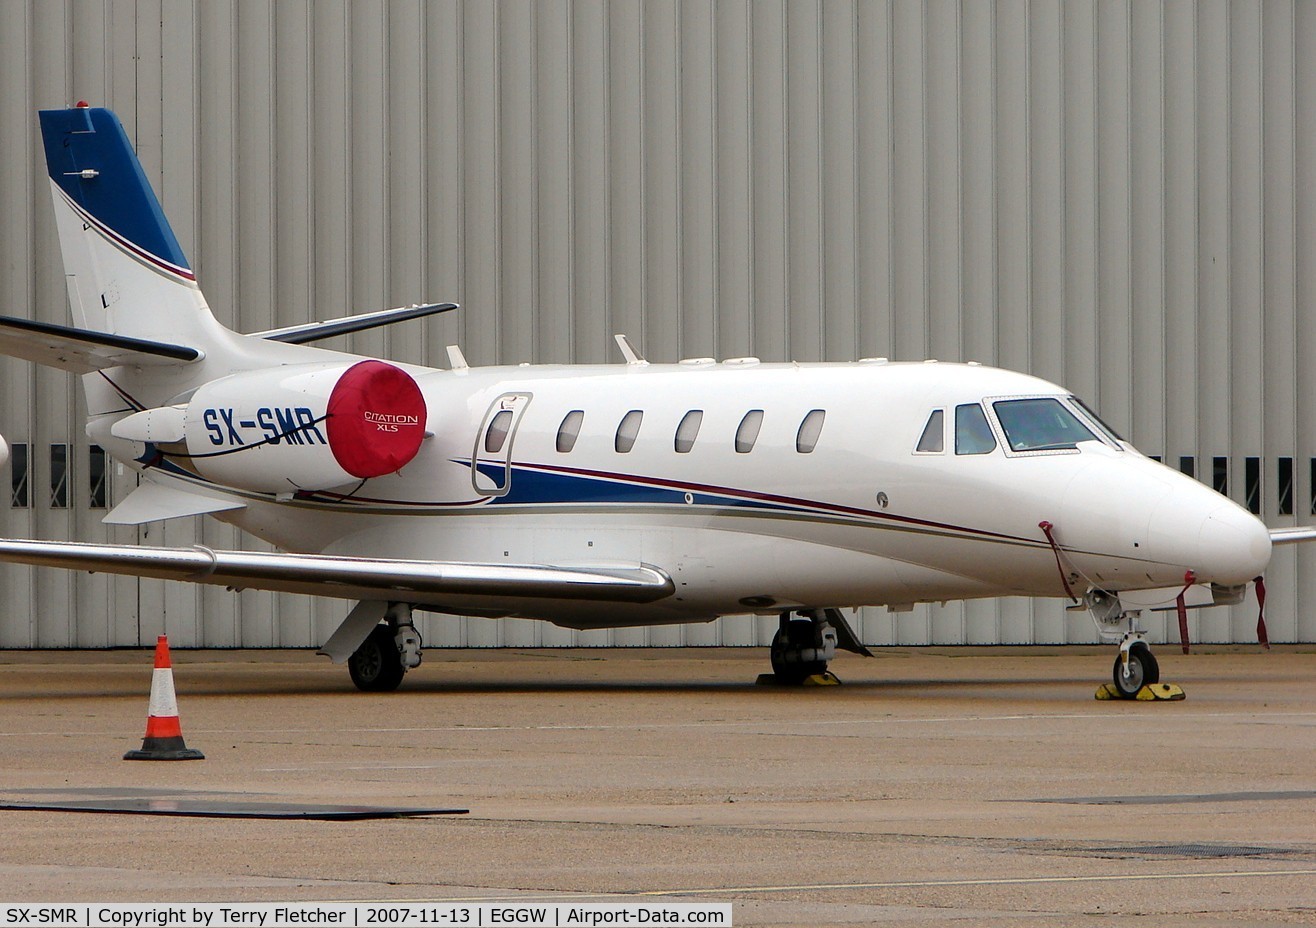 SX-SMR, 2006 Cessna 560 Citation Excel C/N 560-5631, Welcome visitor to Luton